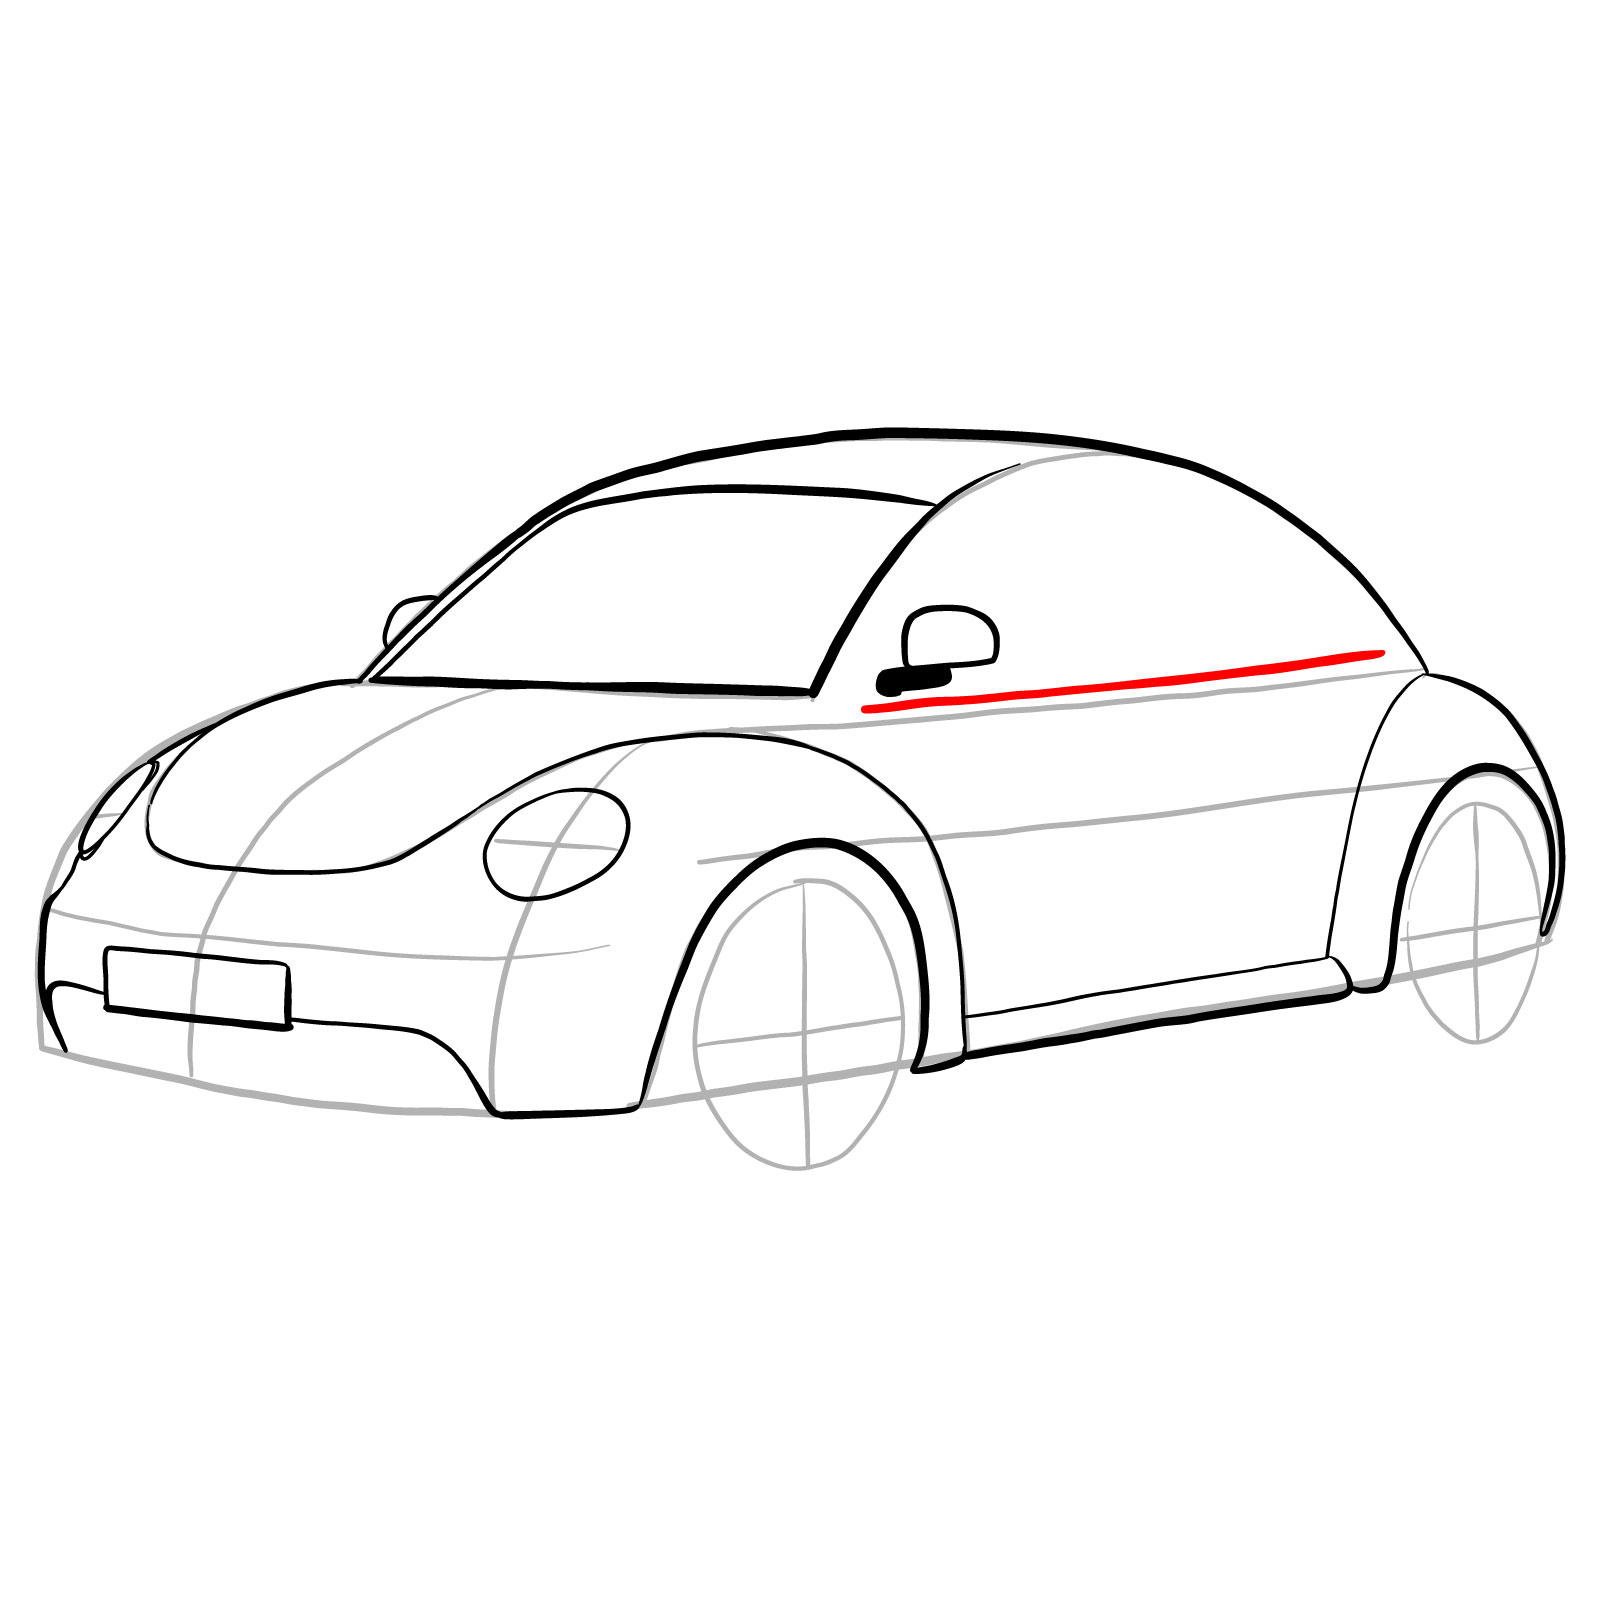 How to draw Volkswagen New Beetle - step 17